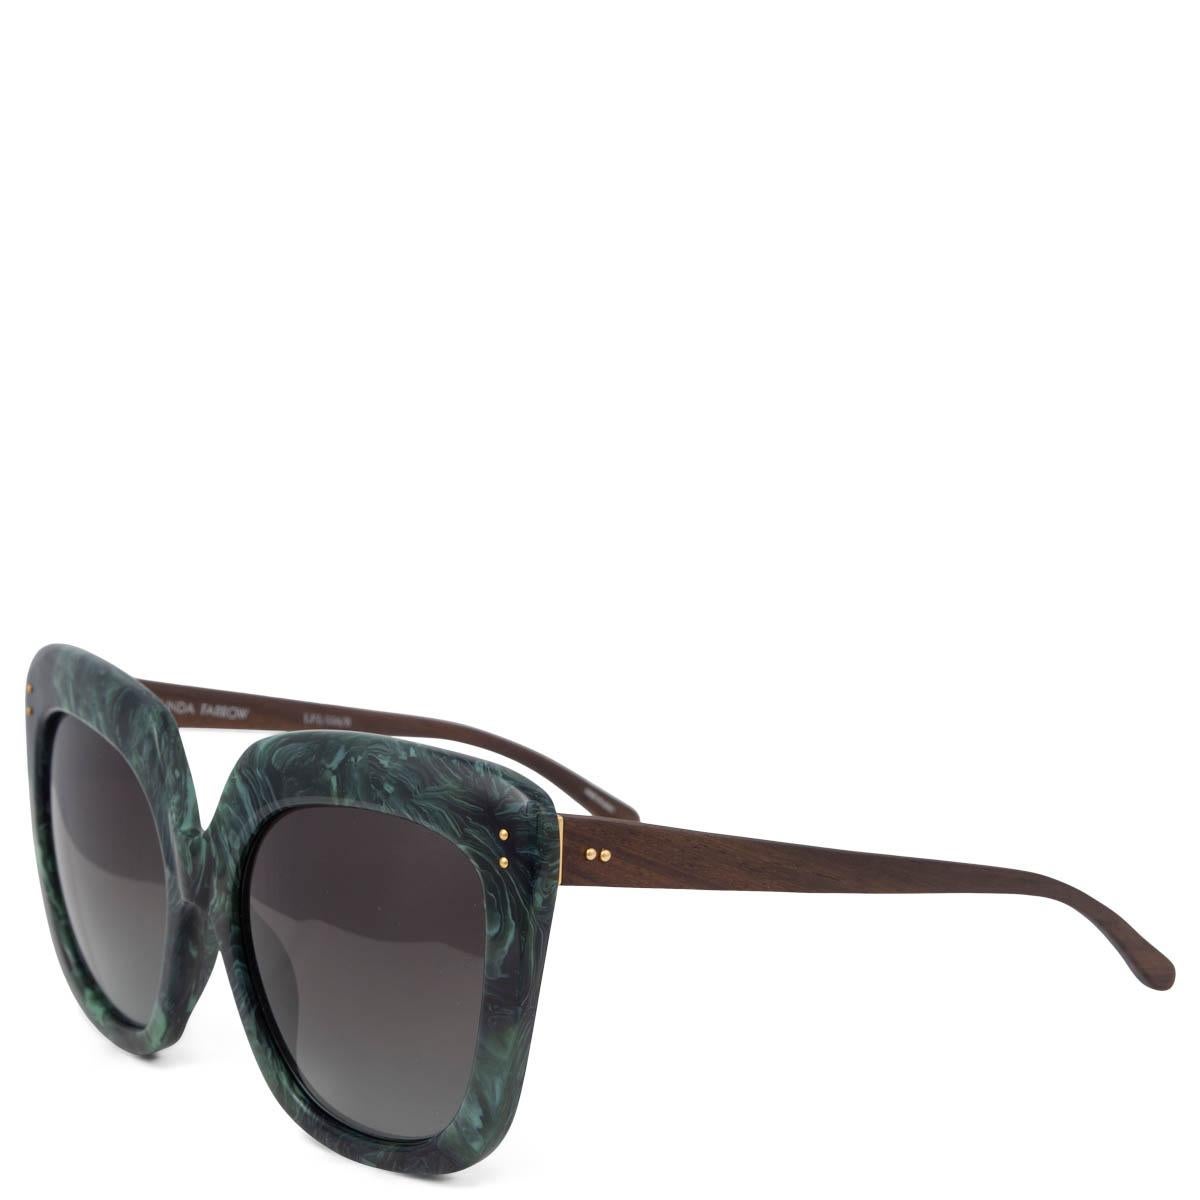 100% authentic Linda Farrow LFL/556/8 oversized sunglasses in green marble optic and green gradient lenses with brown wooden temples. Have been worn once and are in virtually new condition. Come with case. 

Measurements
Model	LFL/556/8
Width	15.5cm